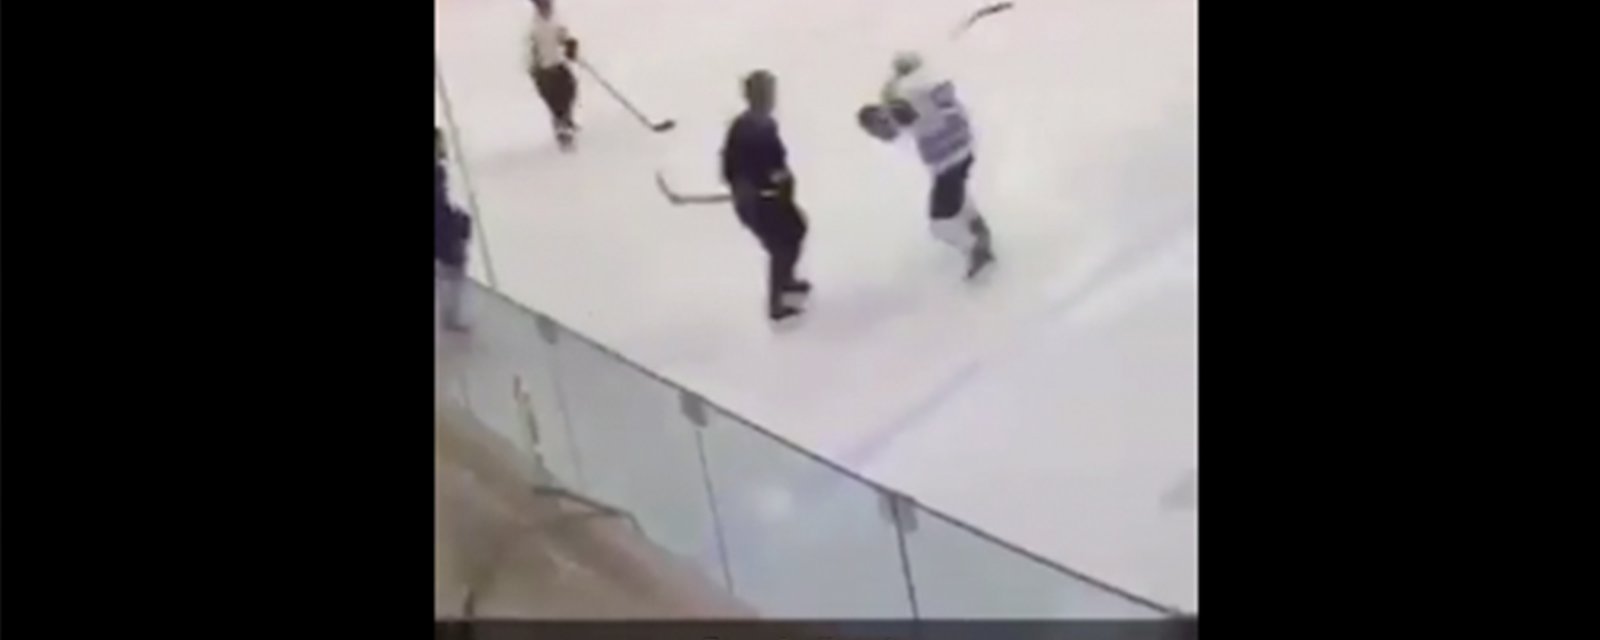 Beer league player takes full on baseball swing at opponent’s head